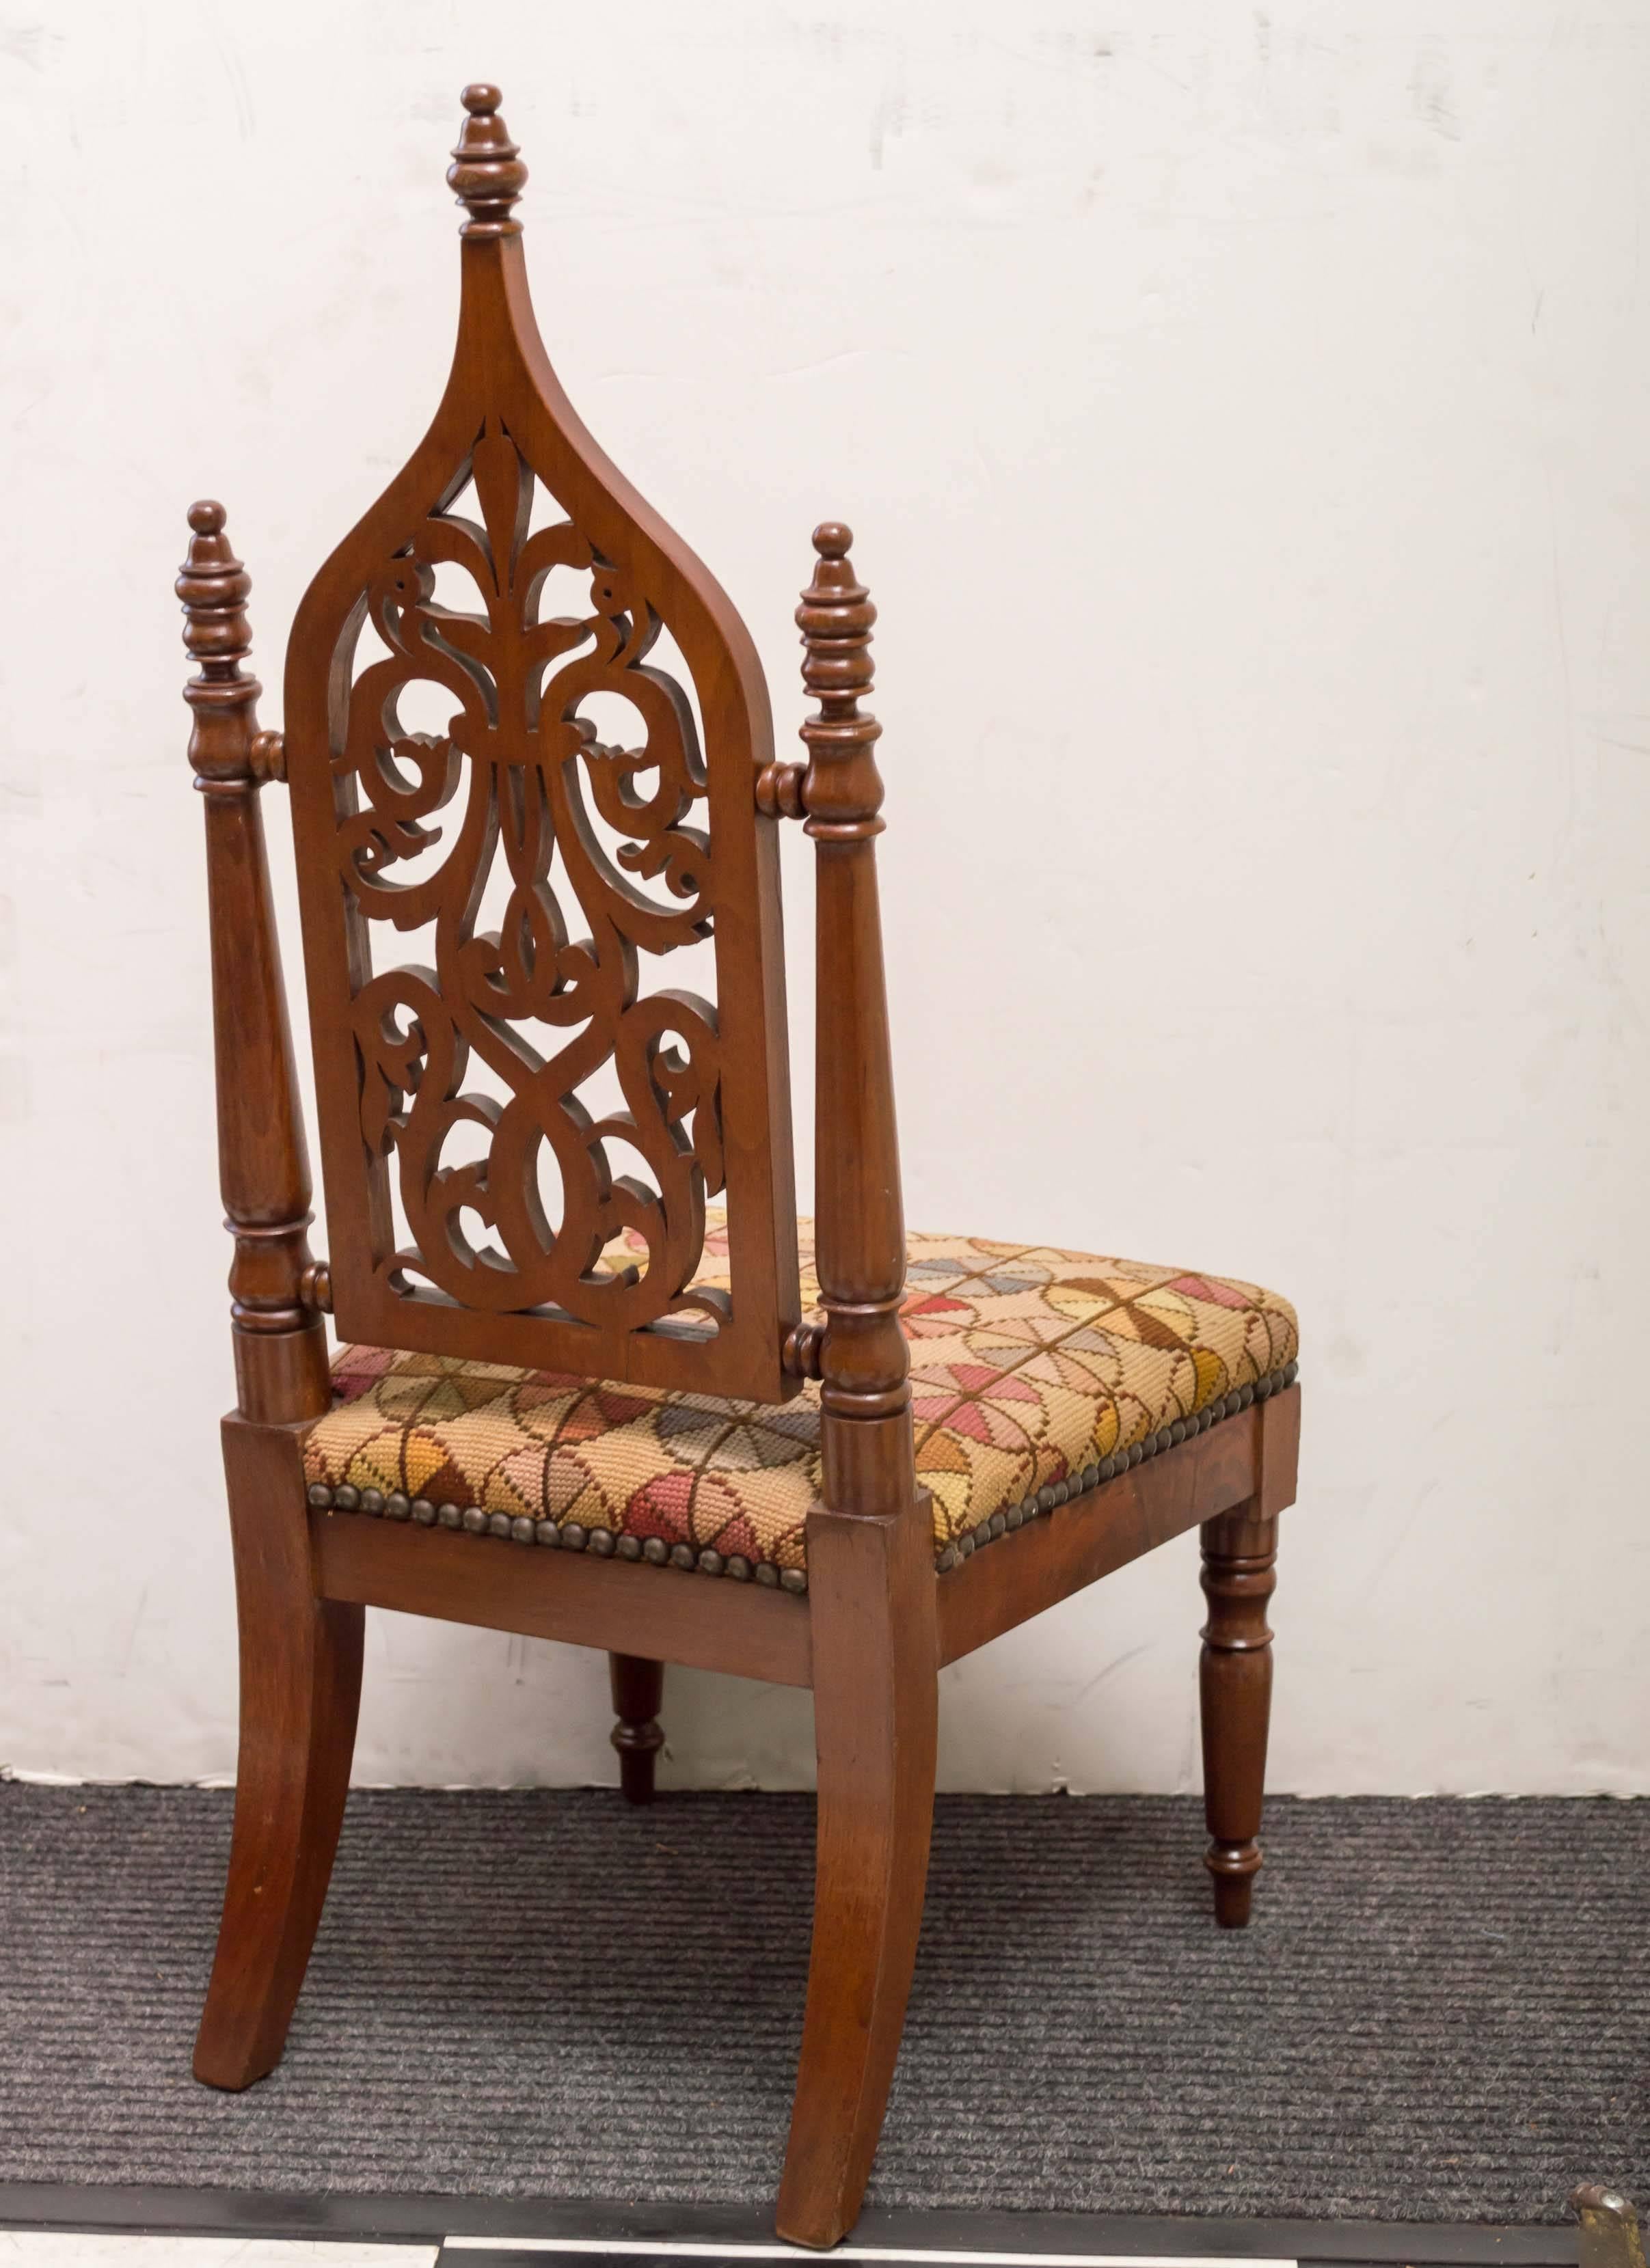 Gothic Revival 19th Century American Neo-Gothic Childs Chair, circa 1860